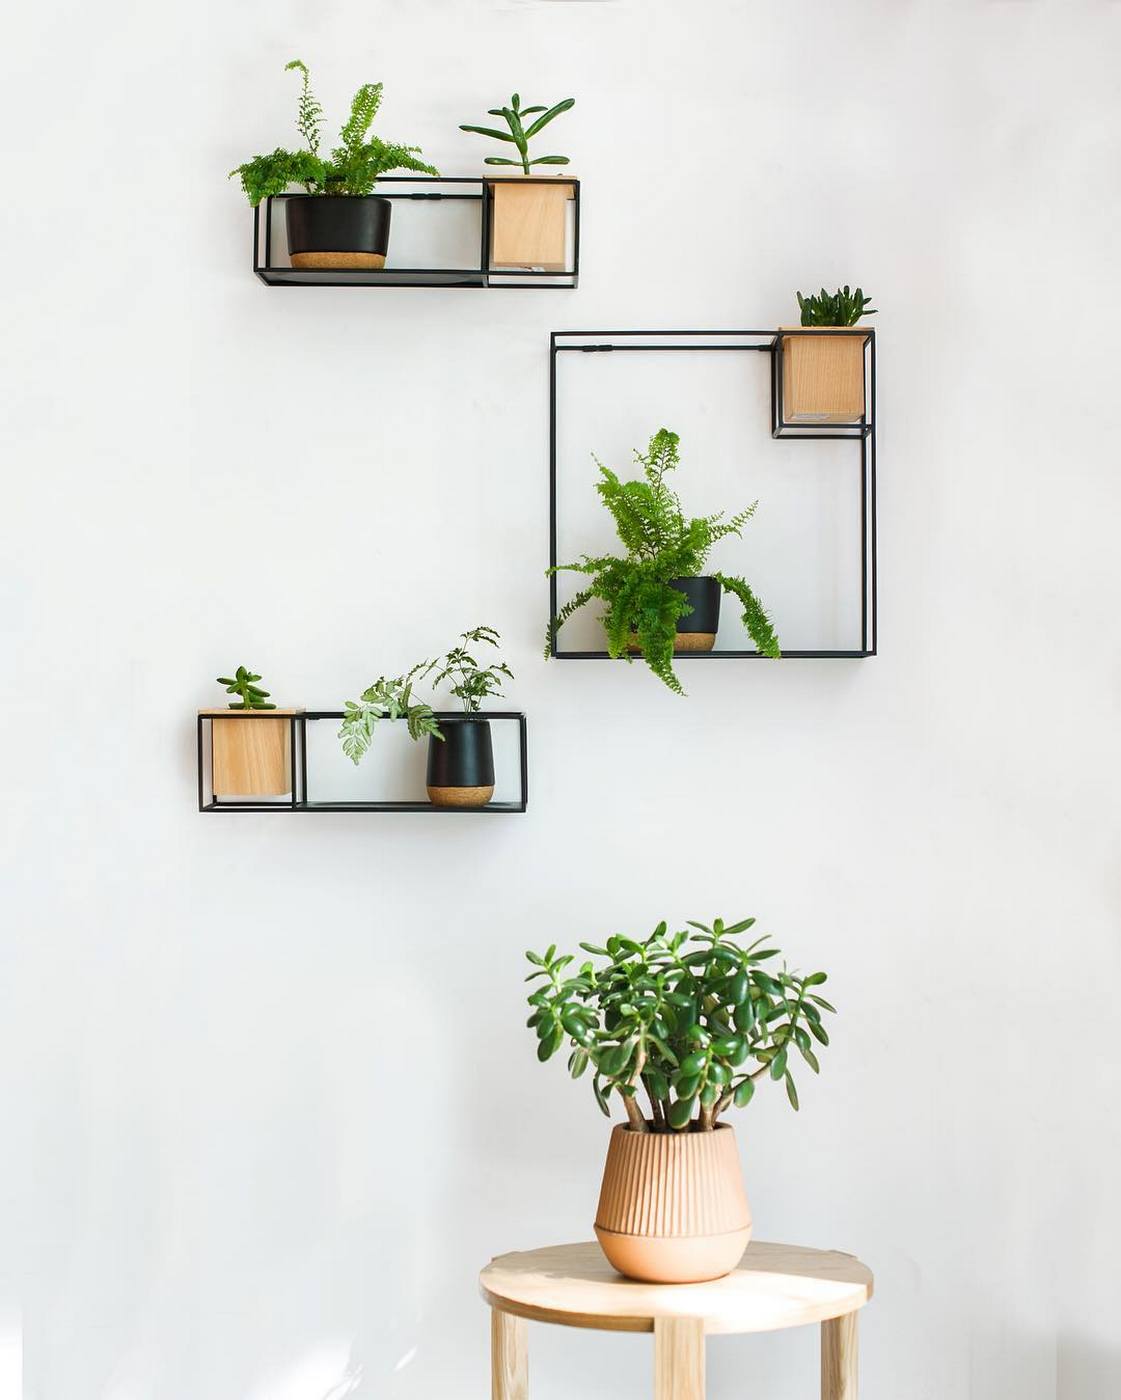 Product Of The Week: Beautiful Floating Shelf With Inbuilt Planter